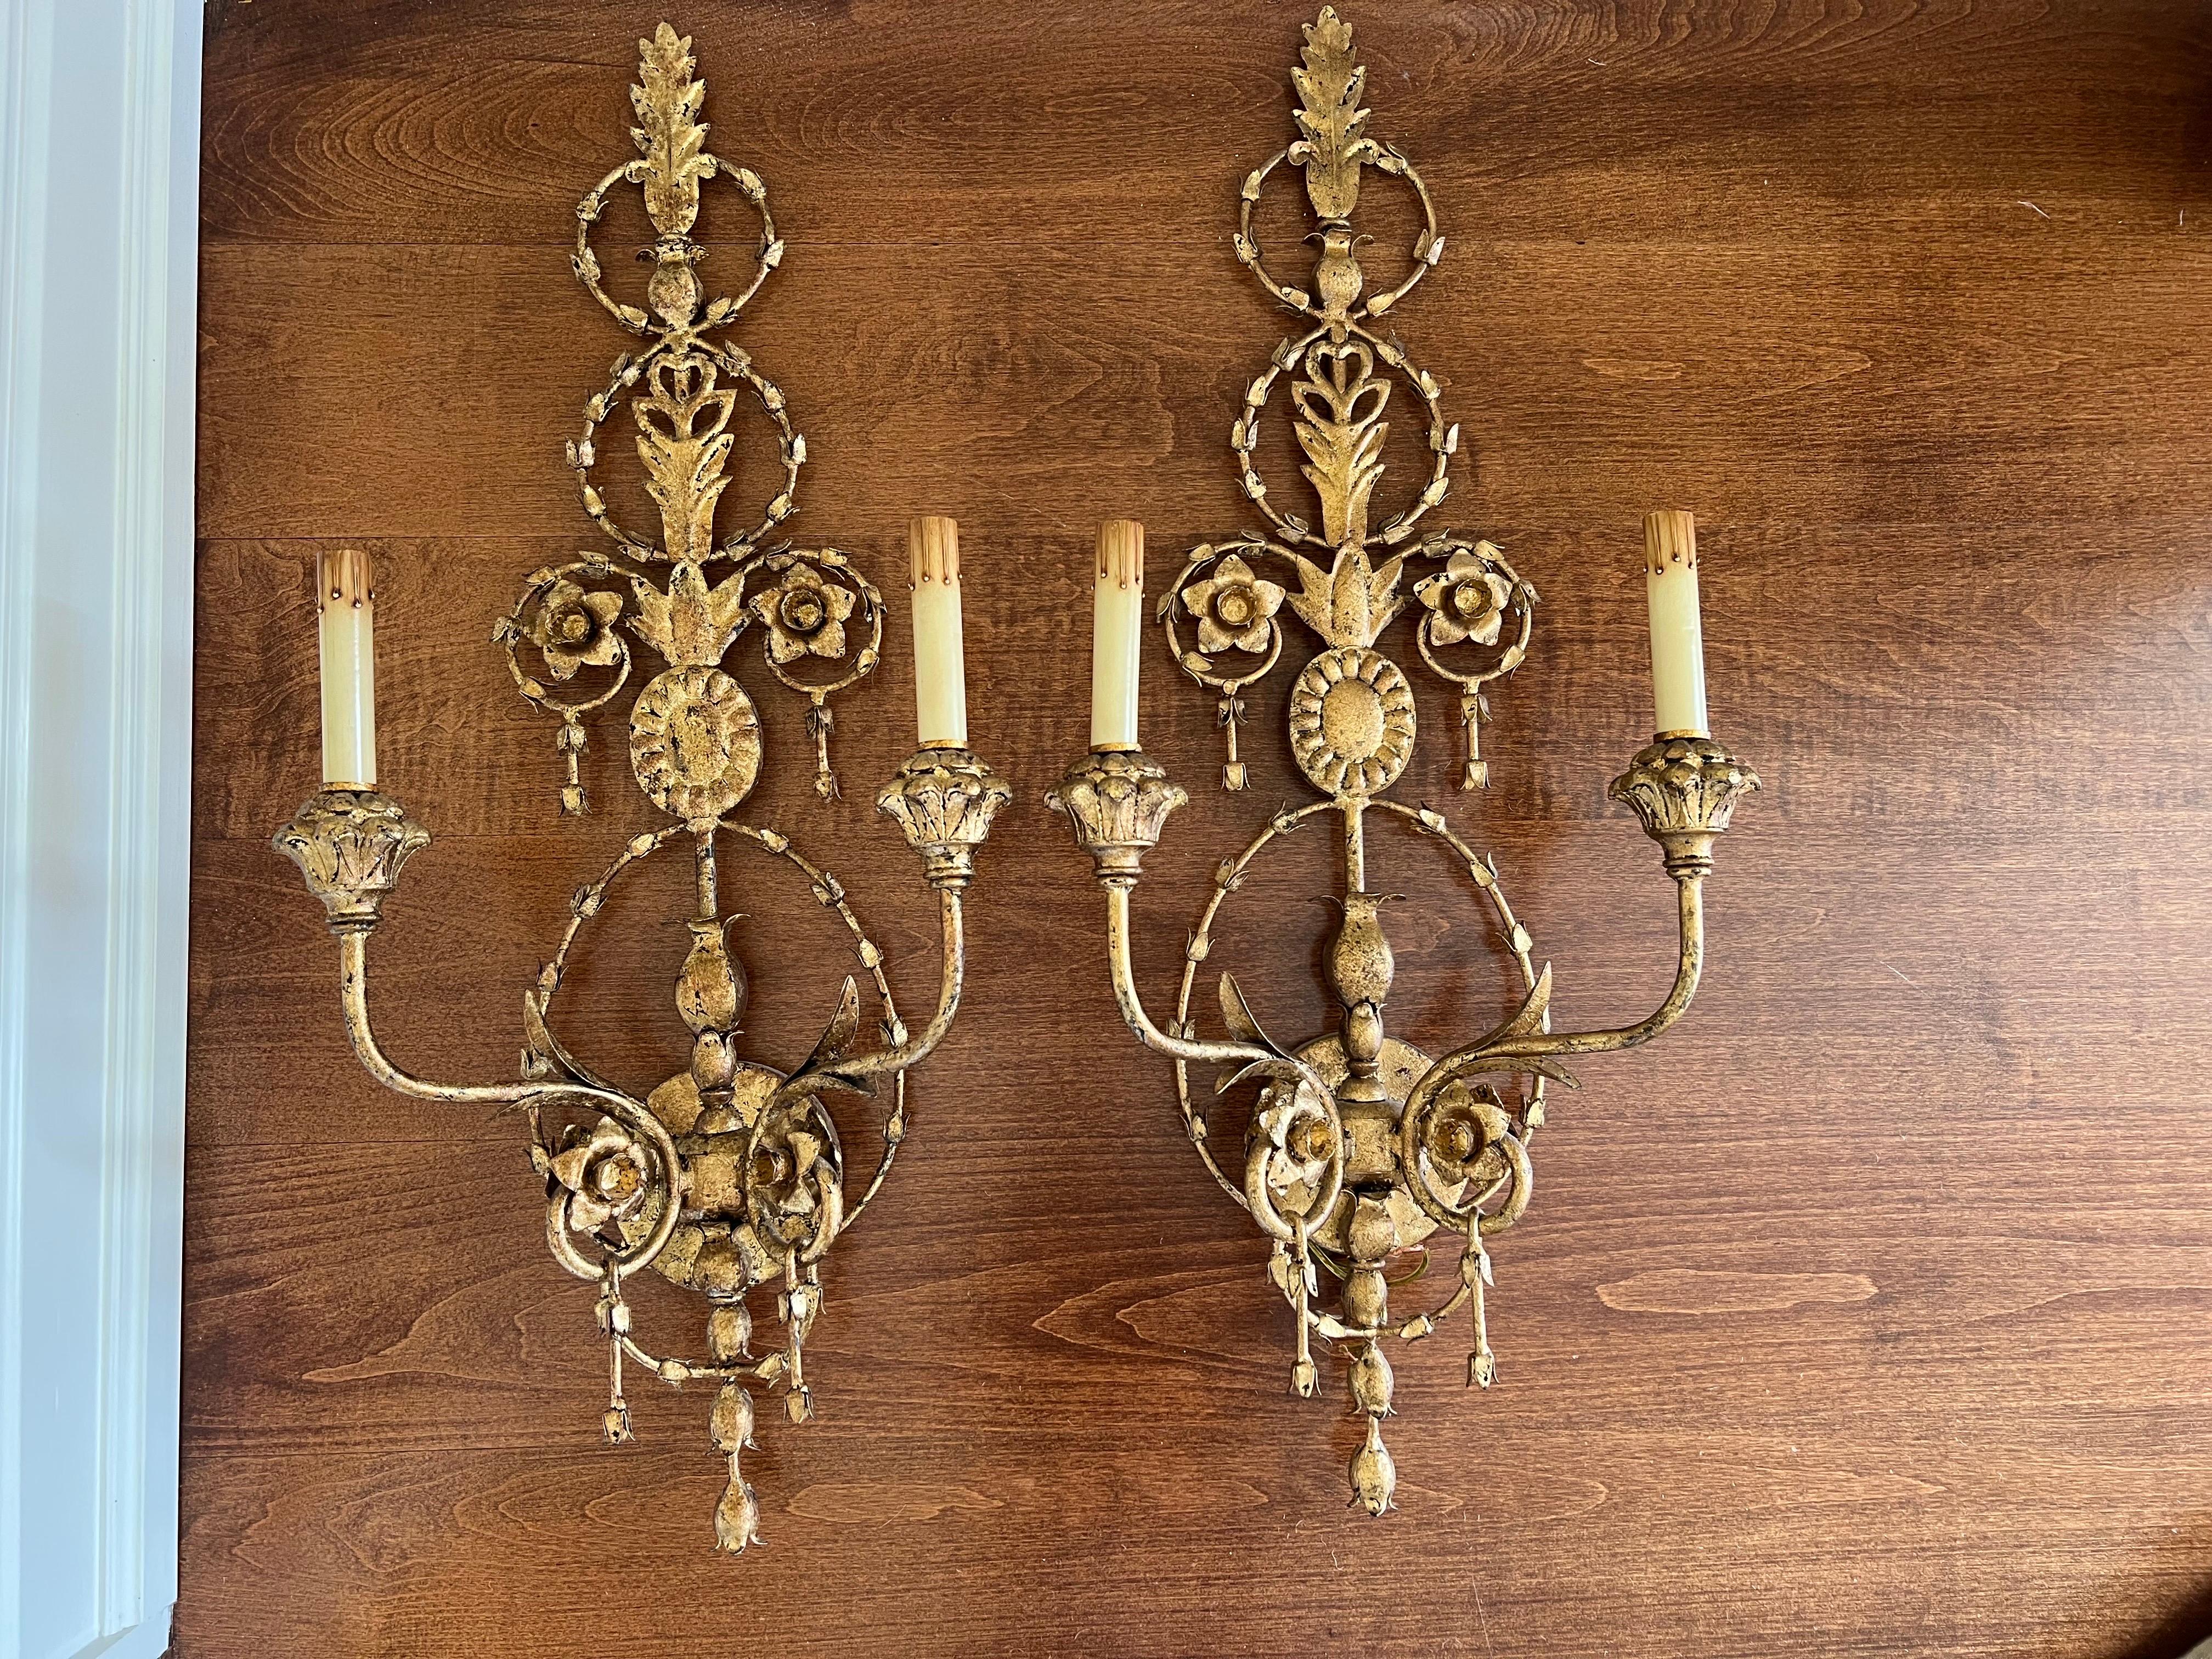 Pair of Currey and Company neoclassical style gilt sconces. The Lillian August Collection from Currey and Company . Signature look and timeless design. Necolassical traditional gilt metal sconces in a gold leaf finish. These do not come with shades.